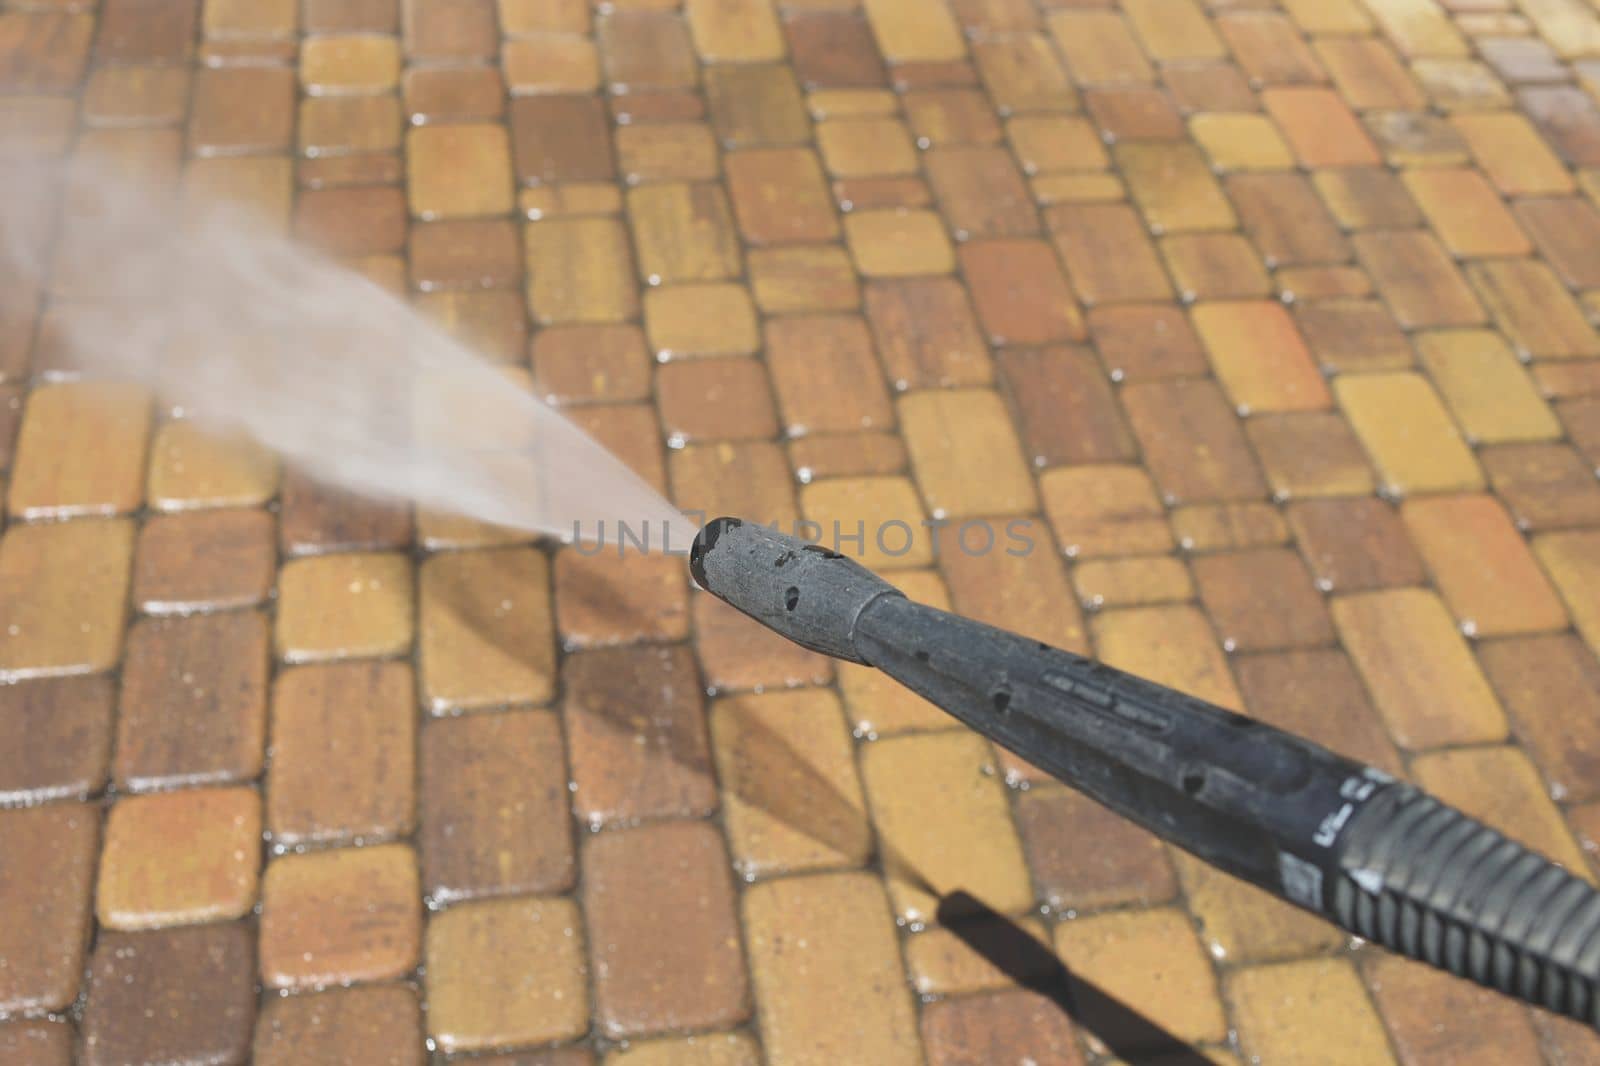 Cleaning backyard paving tiles with high pressure washer. Spring clean up. Cleaning dirty backyard paving tiles with pressure washer cleaner by Proxima13